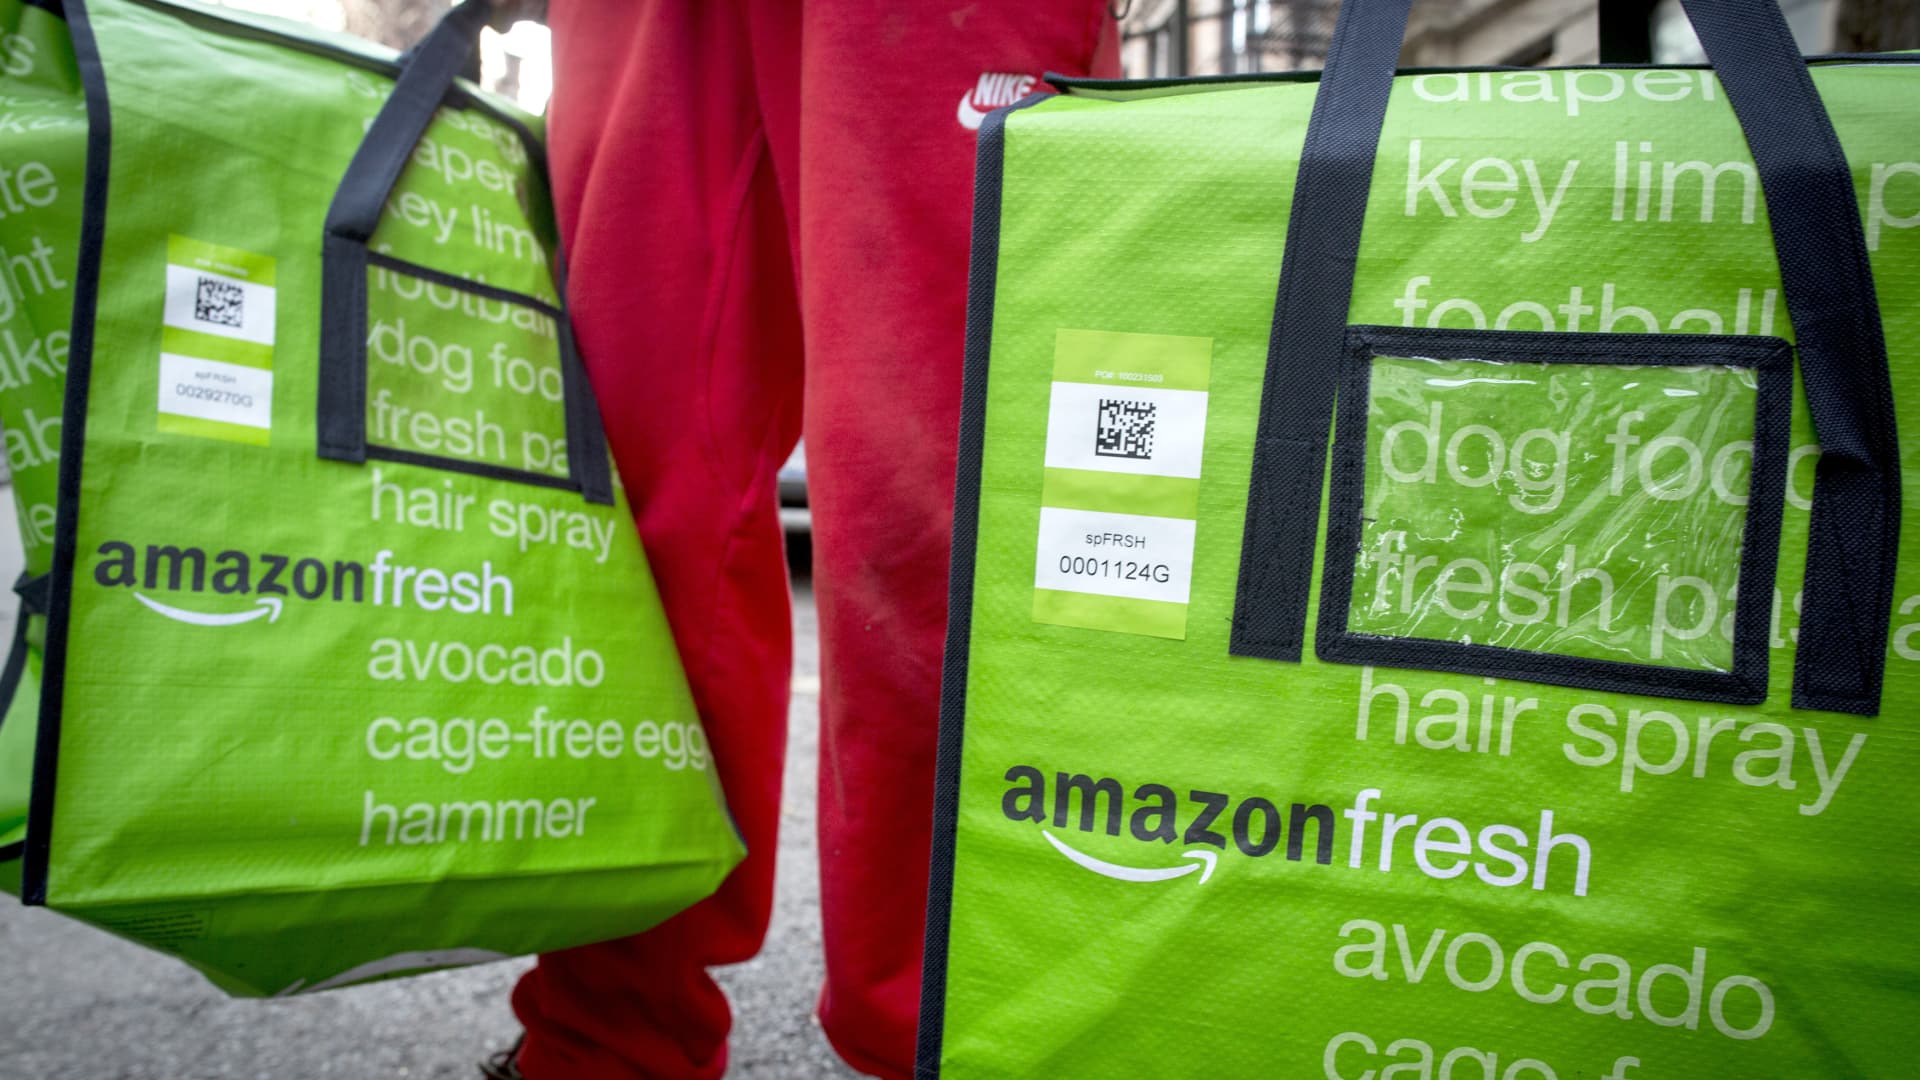 Amazon to start charging delivery fees on Fresh grocery orders under $150 – CNBC